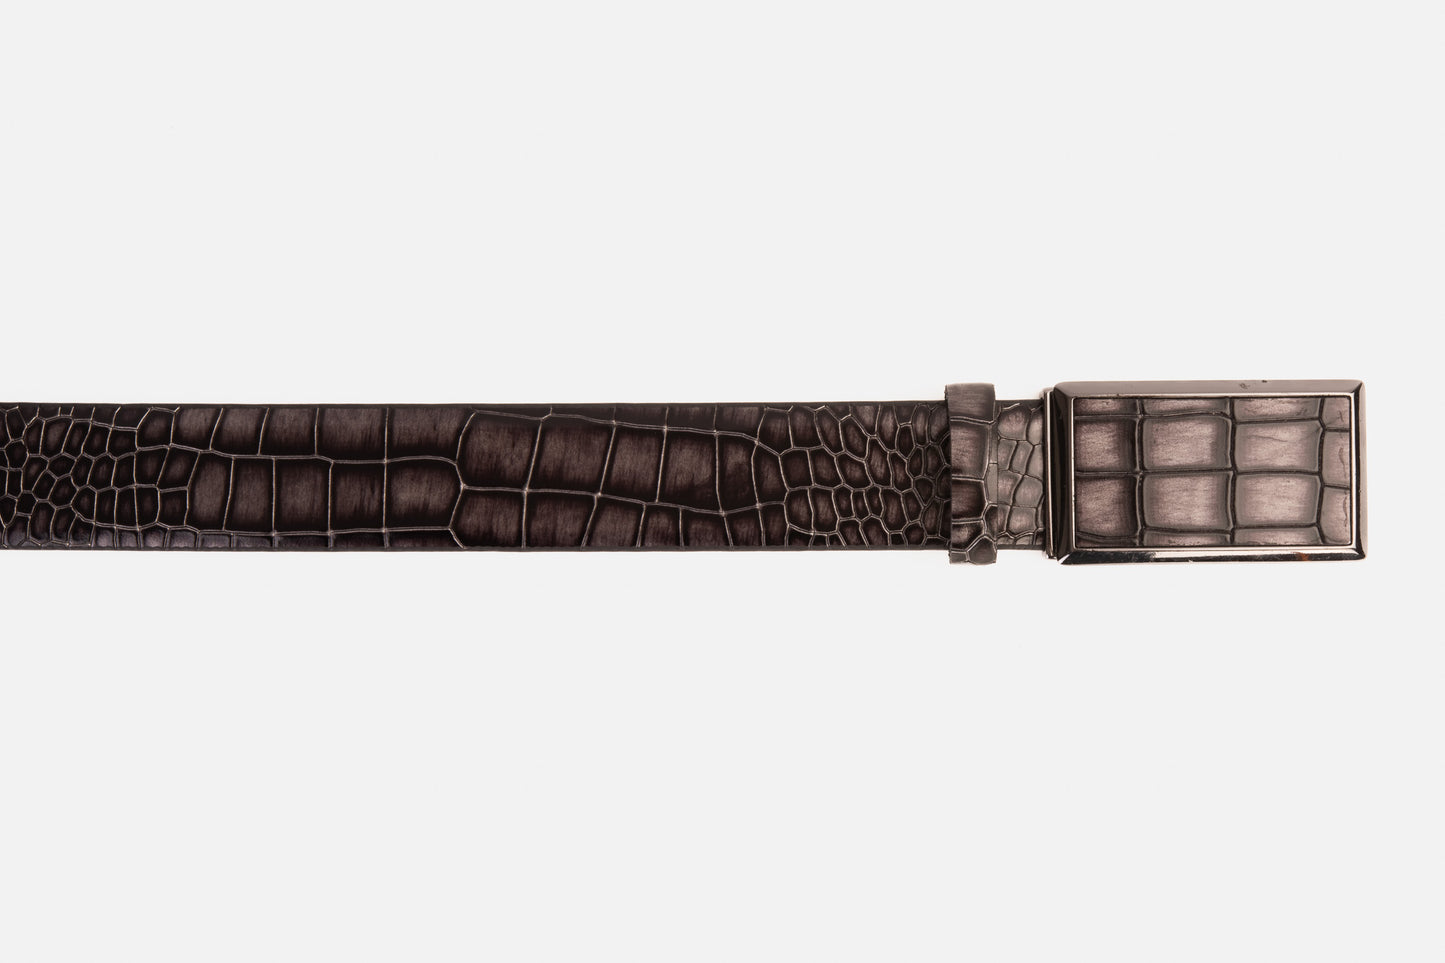 The Mississippi Gray Leather Belt